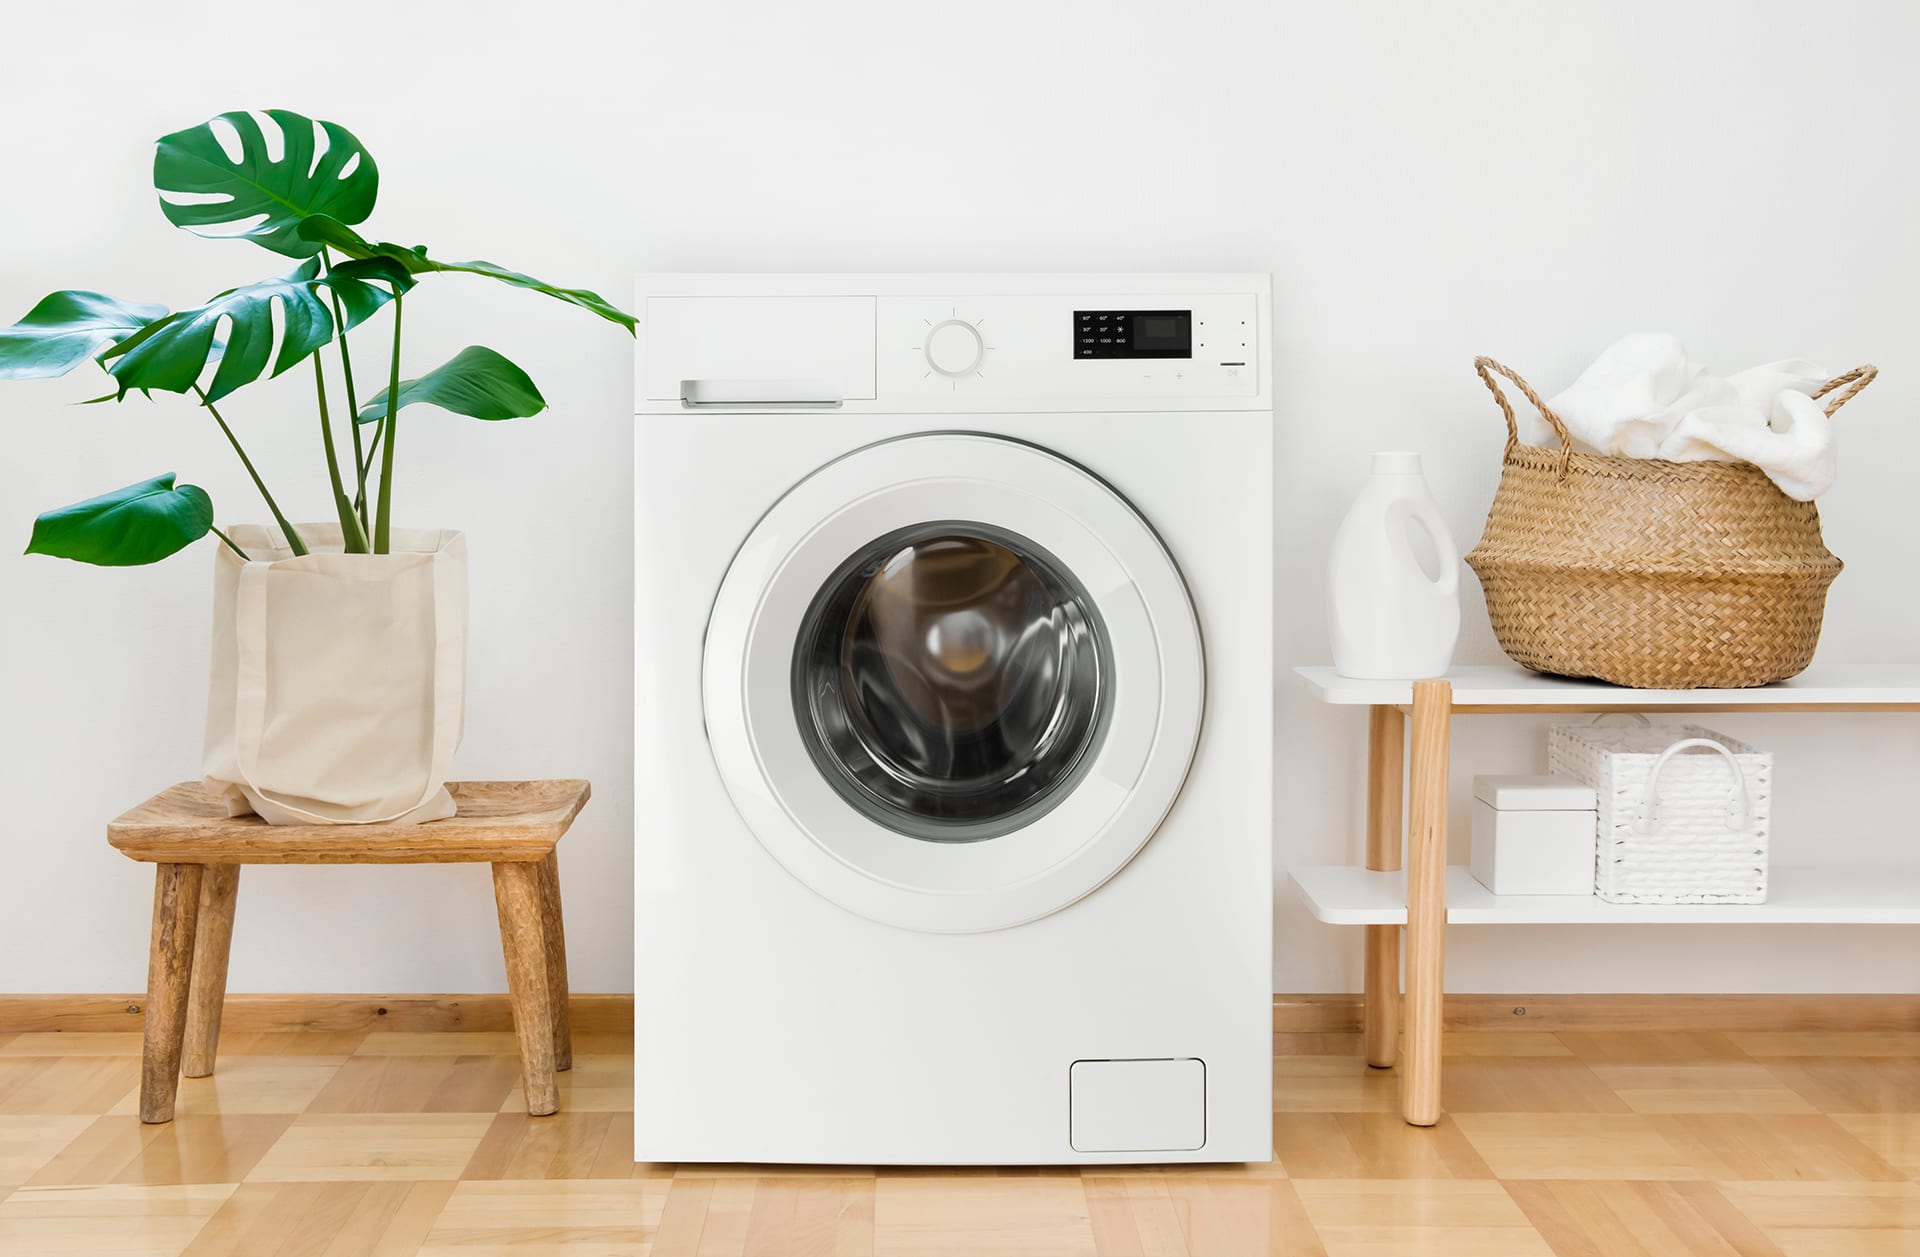 A large white washing machine sits on a wooden floor in between a large palm plant on the left and a small wooden shelf on the right. A wicker basket with white towels sits on the shelf, and next to it is a plain, all-white bottle of laundry detergent.